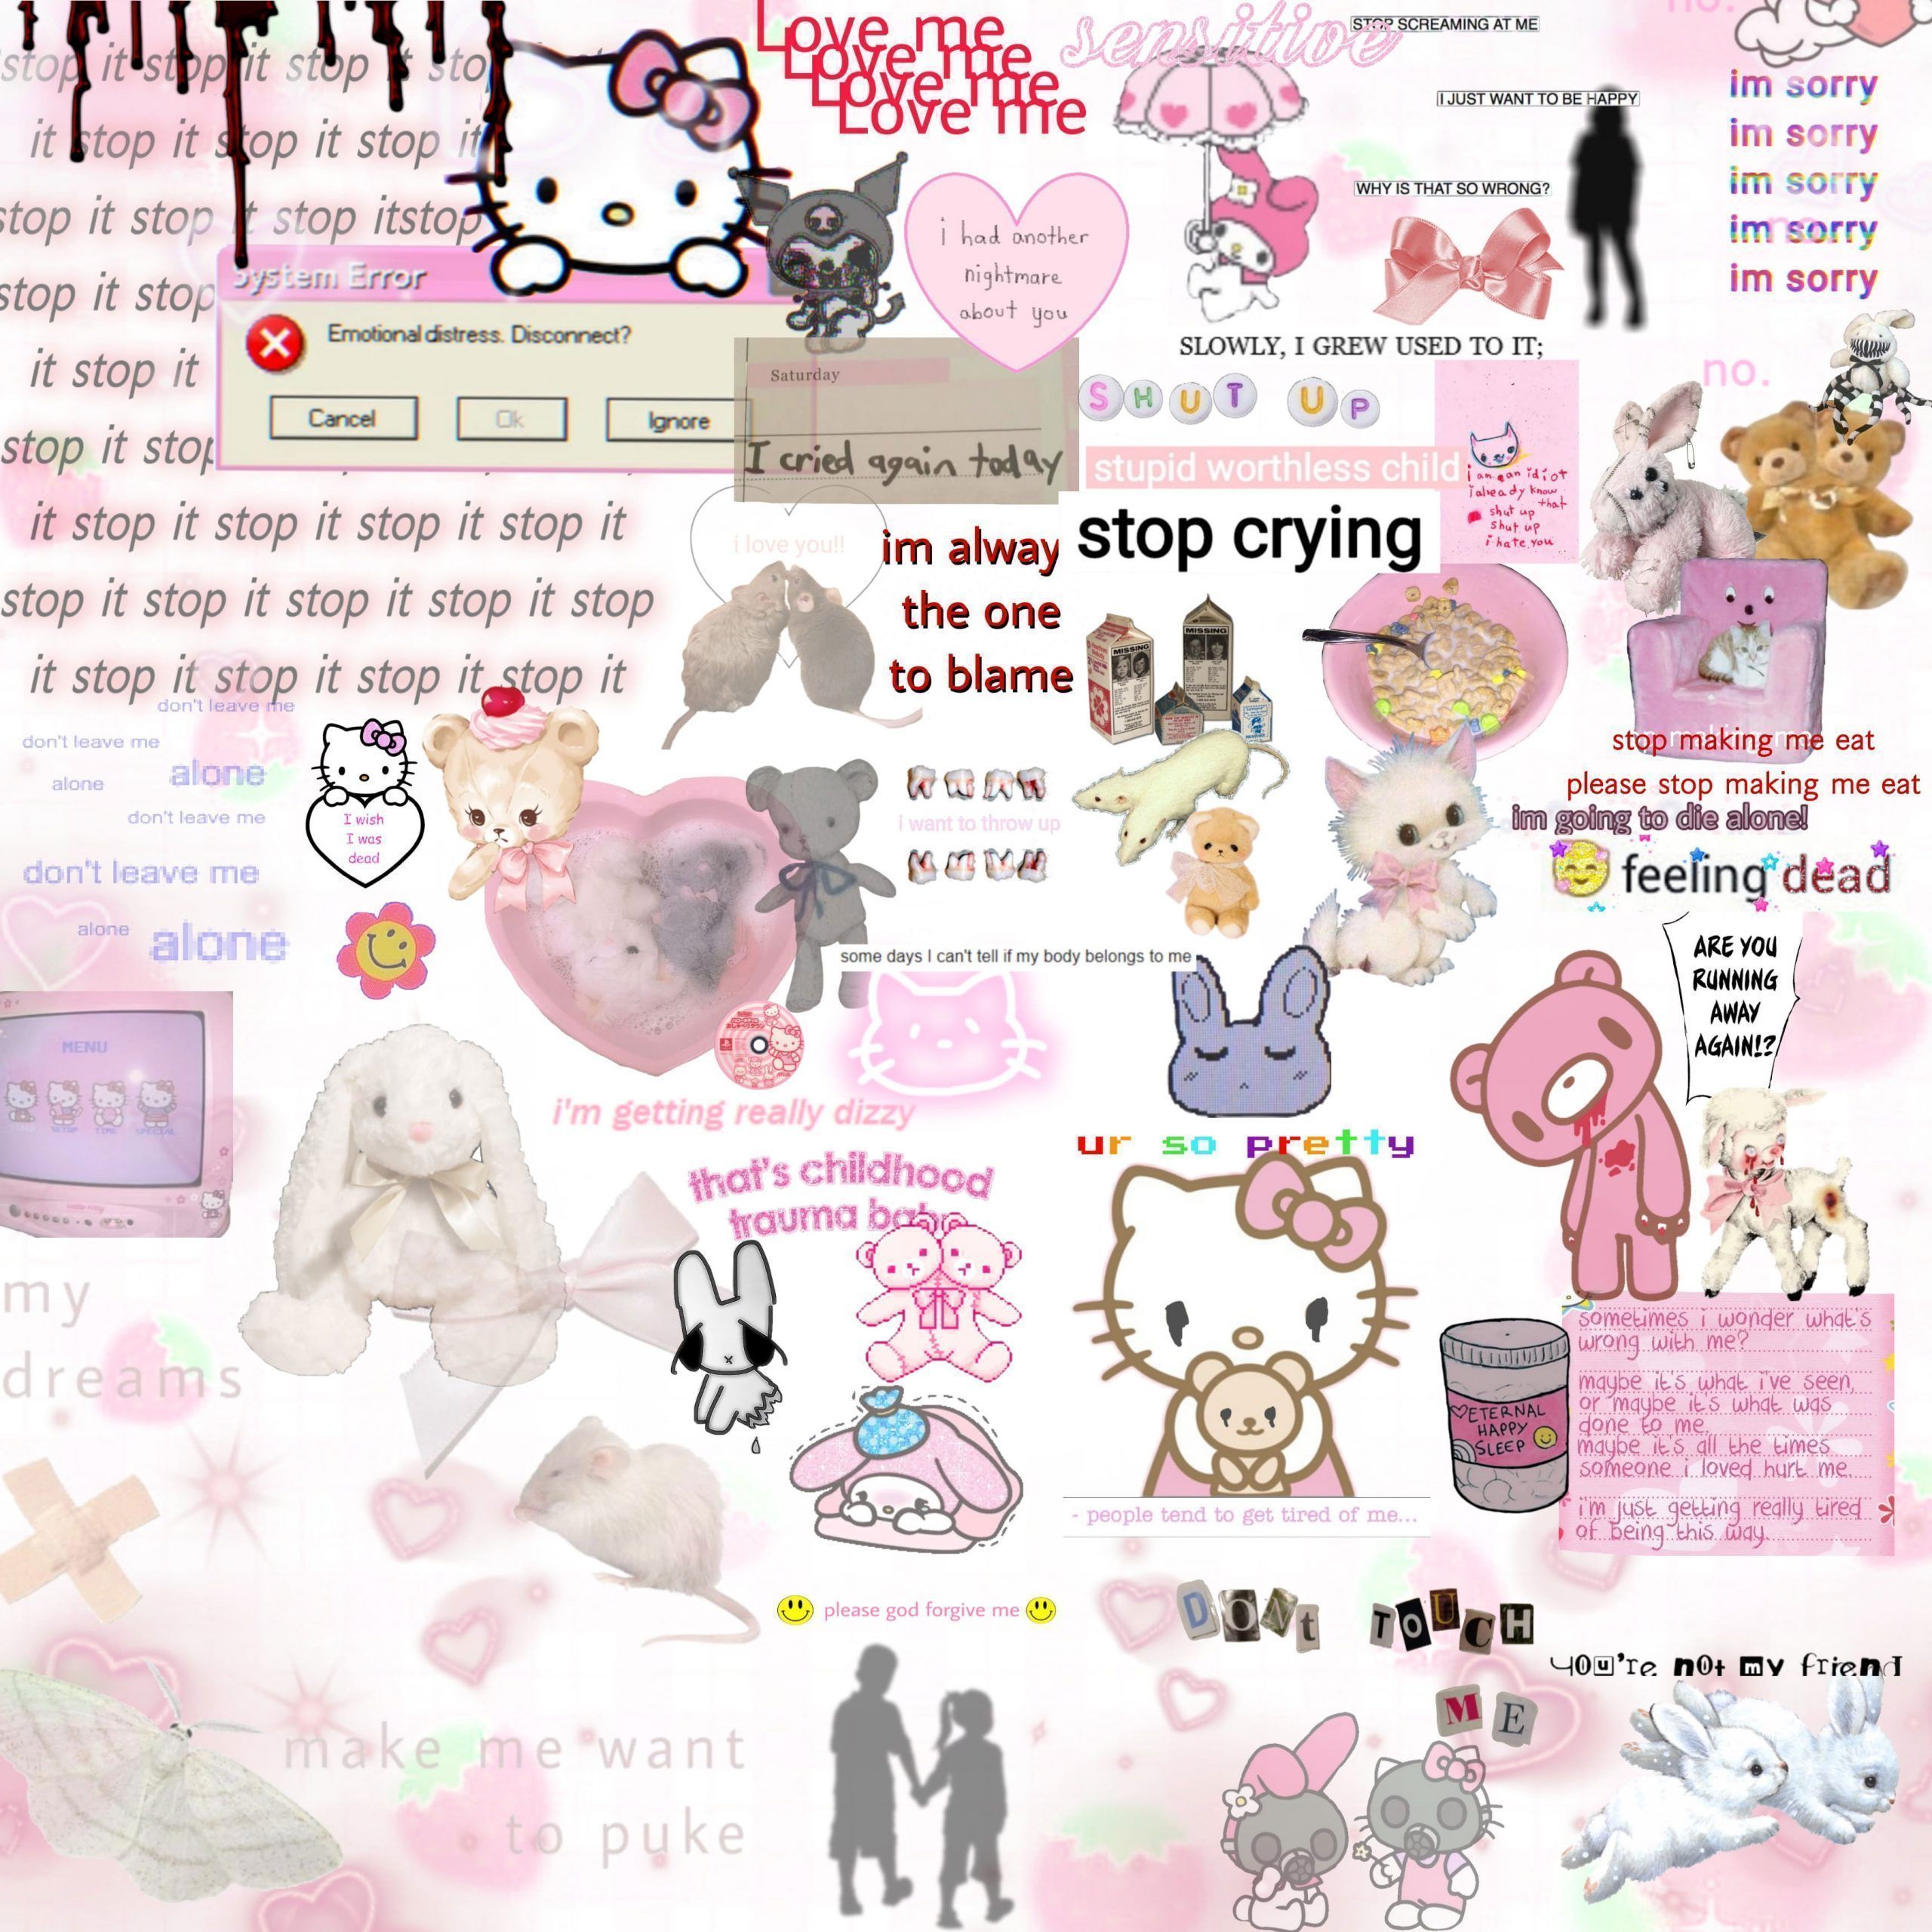 A collage of cute characters and pink aesthetics. - Animecore, traumacore